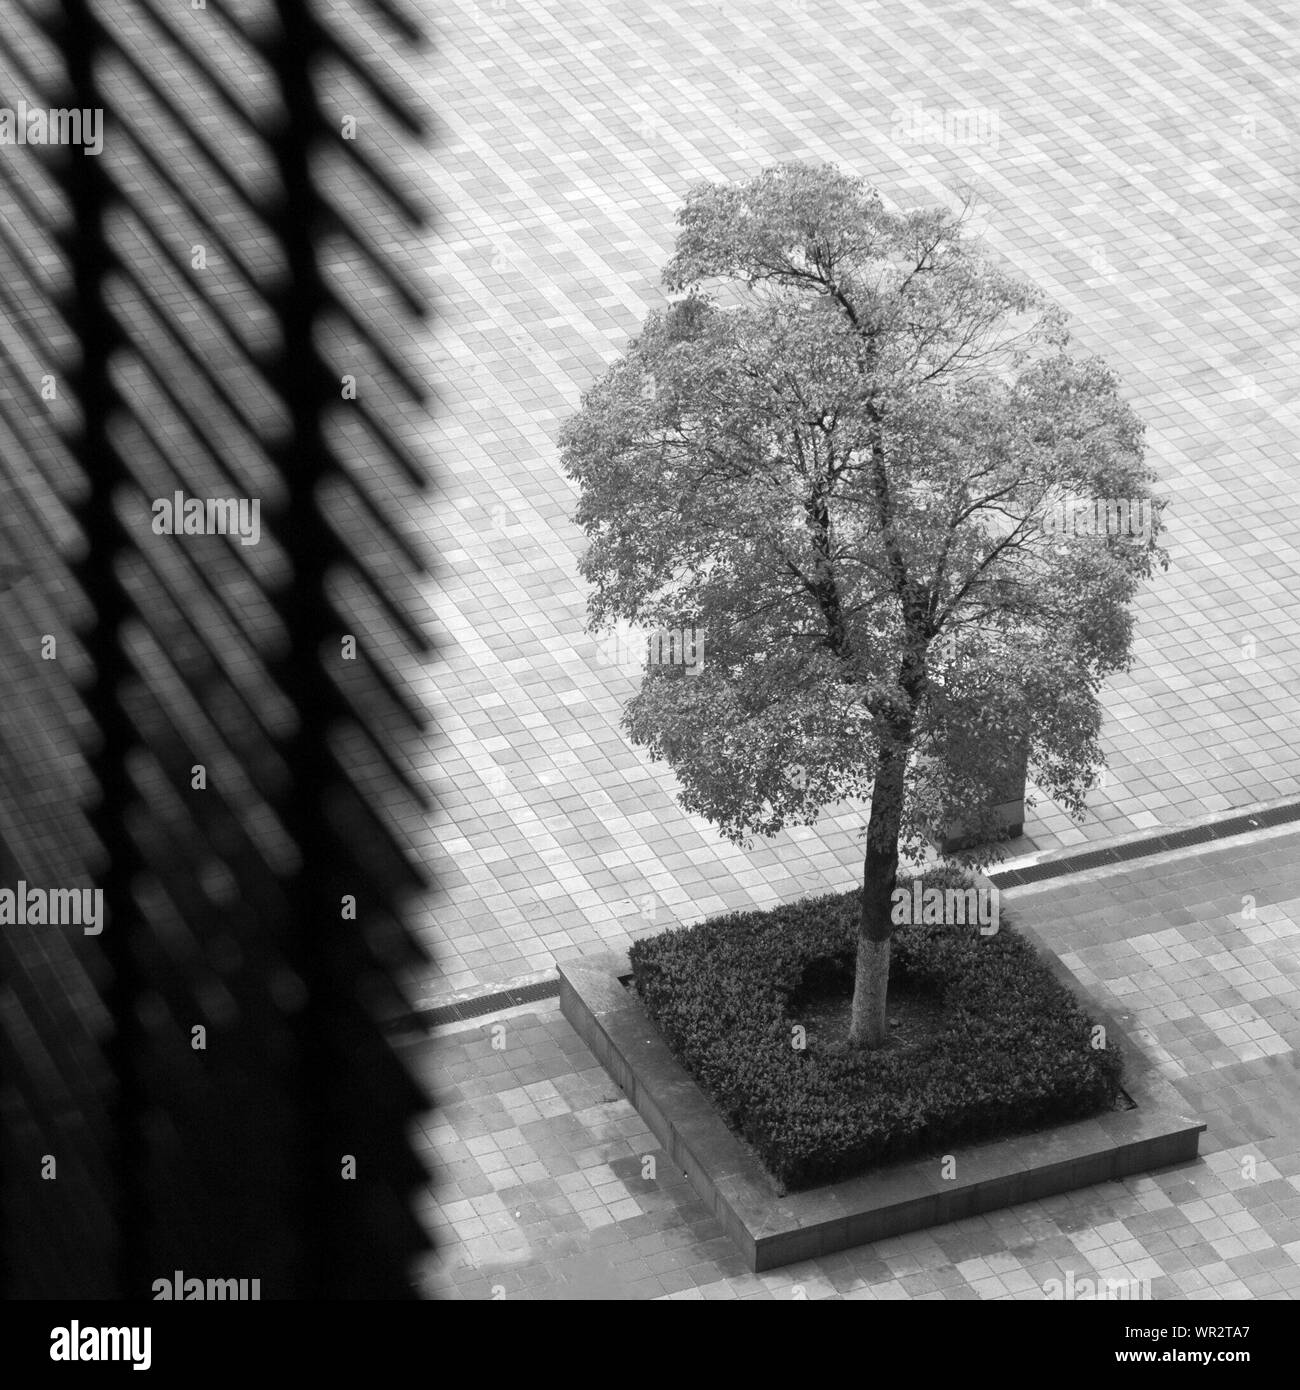 An Urban View Of A Tree From Window Stock Photo